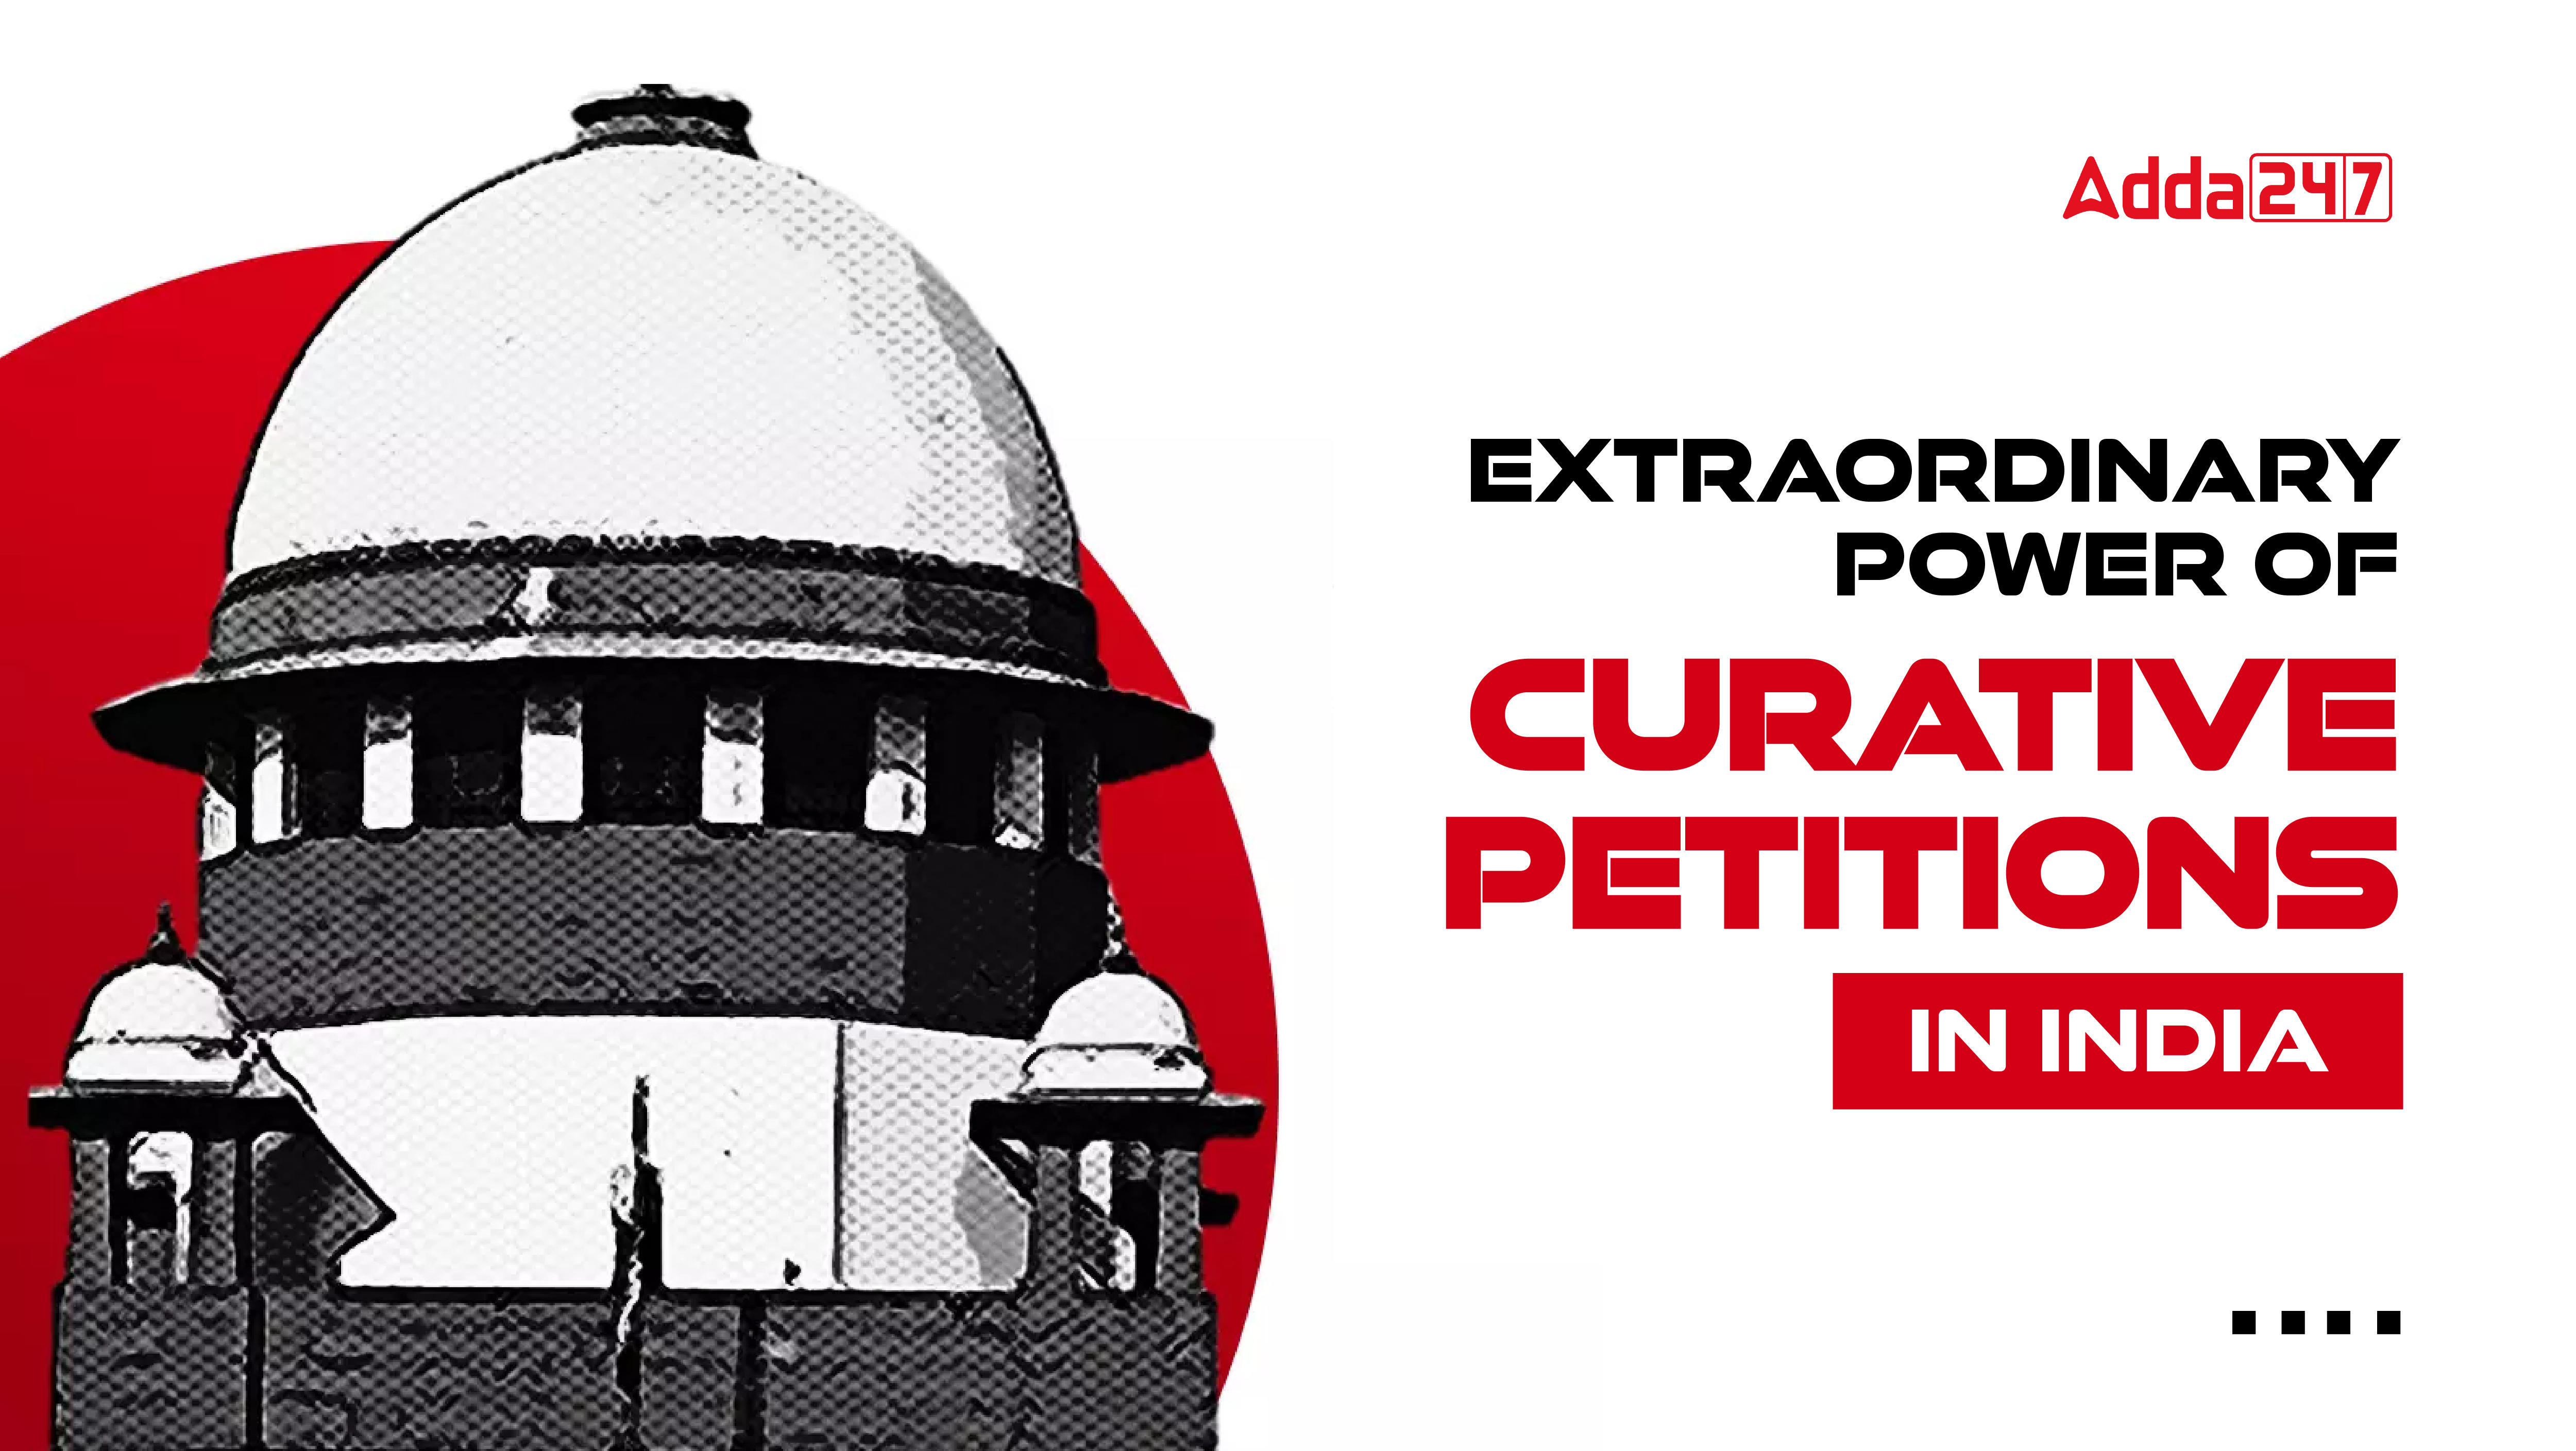 Extraordinary Power of Curative Petitions in India